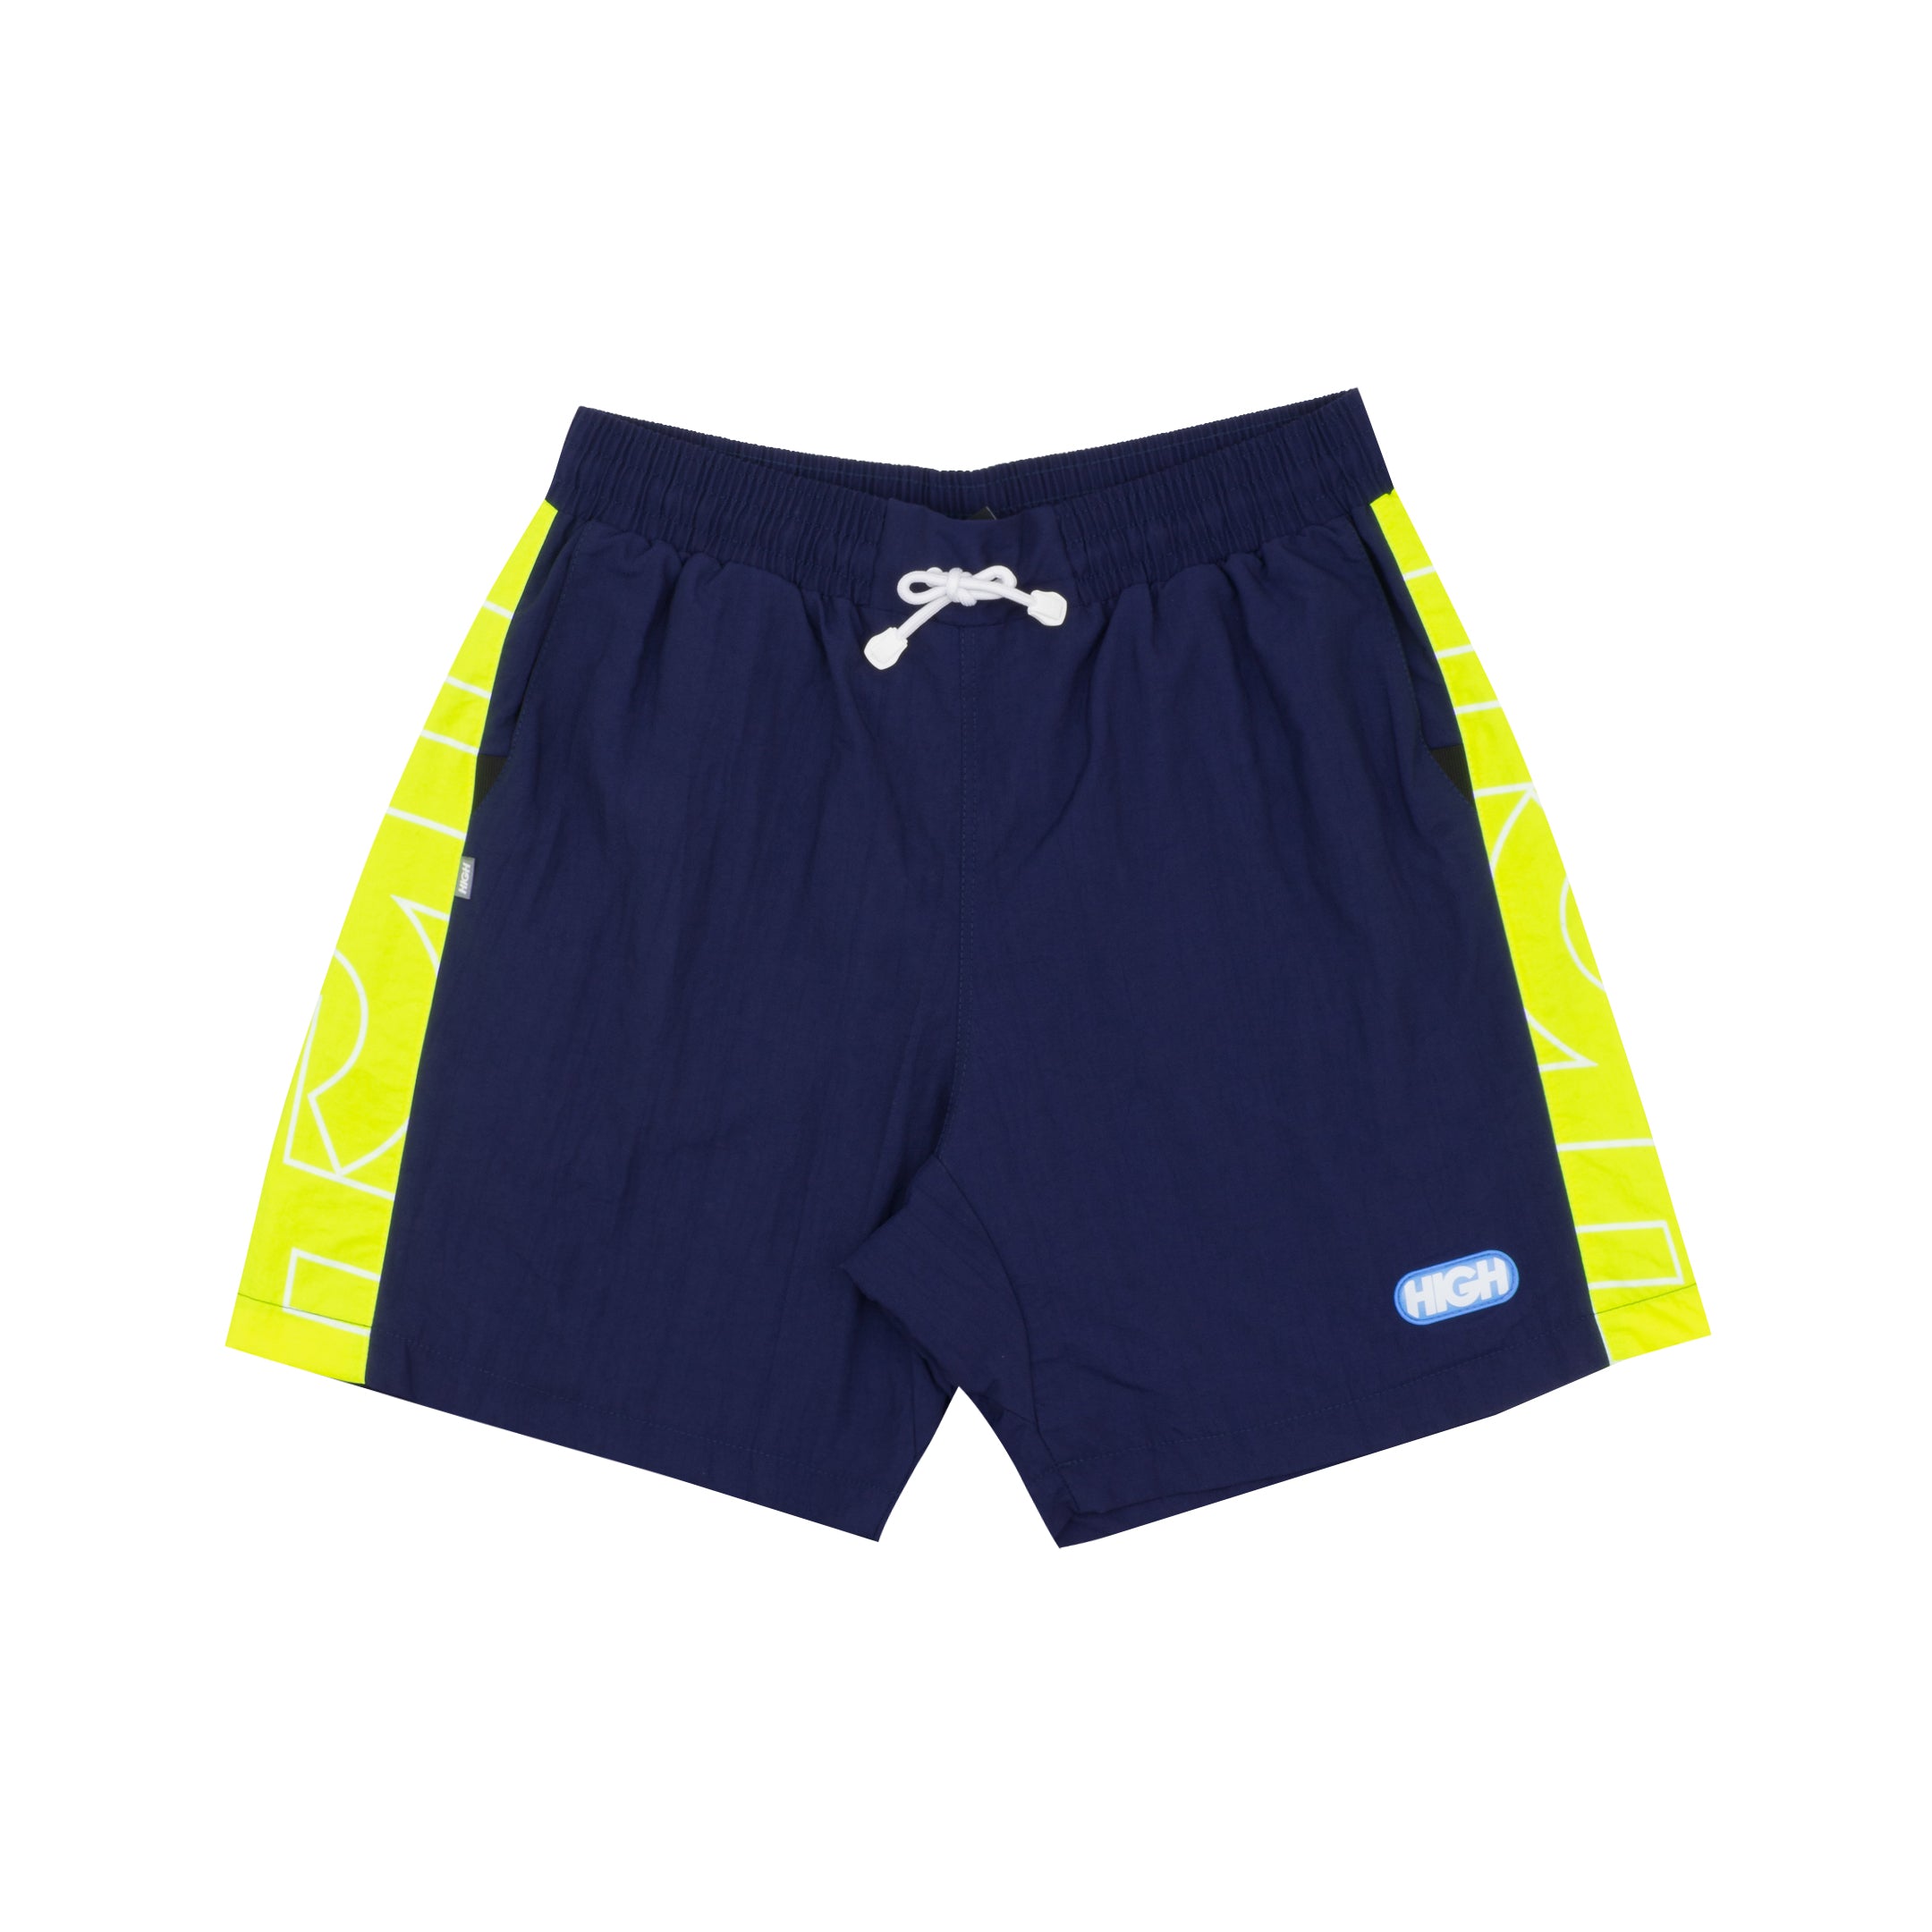 HIGH - Shorts Crop Navy/ Lime